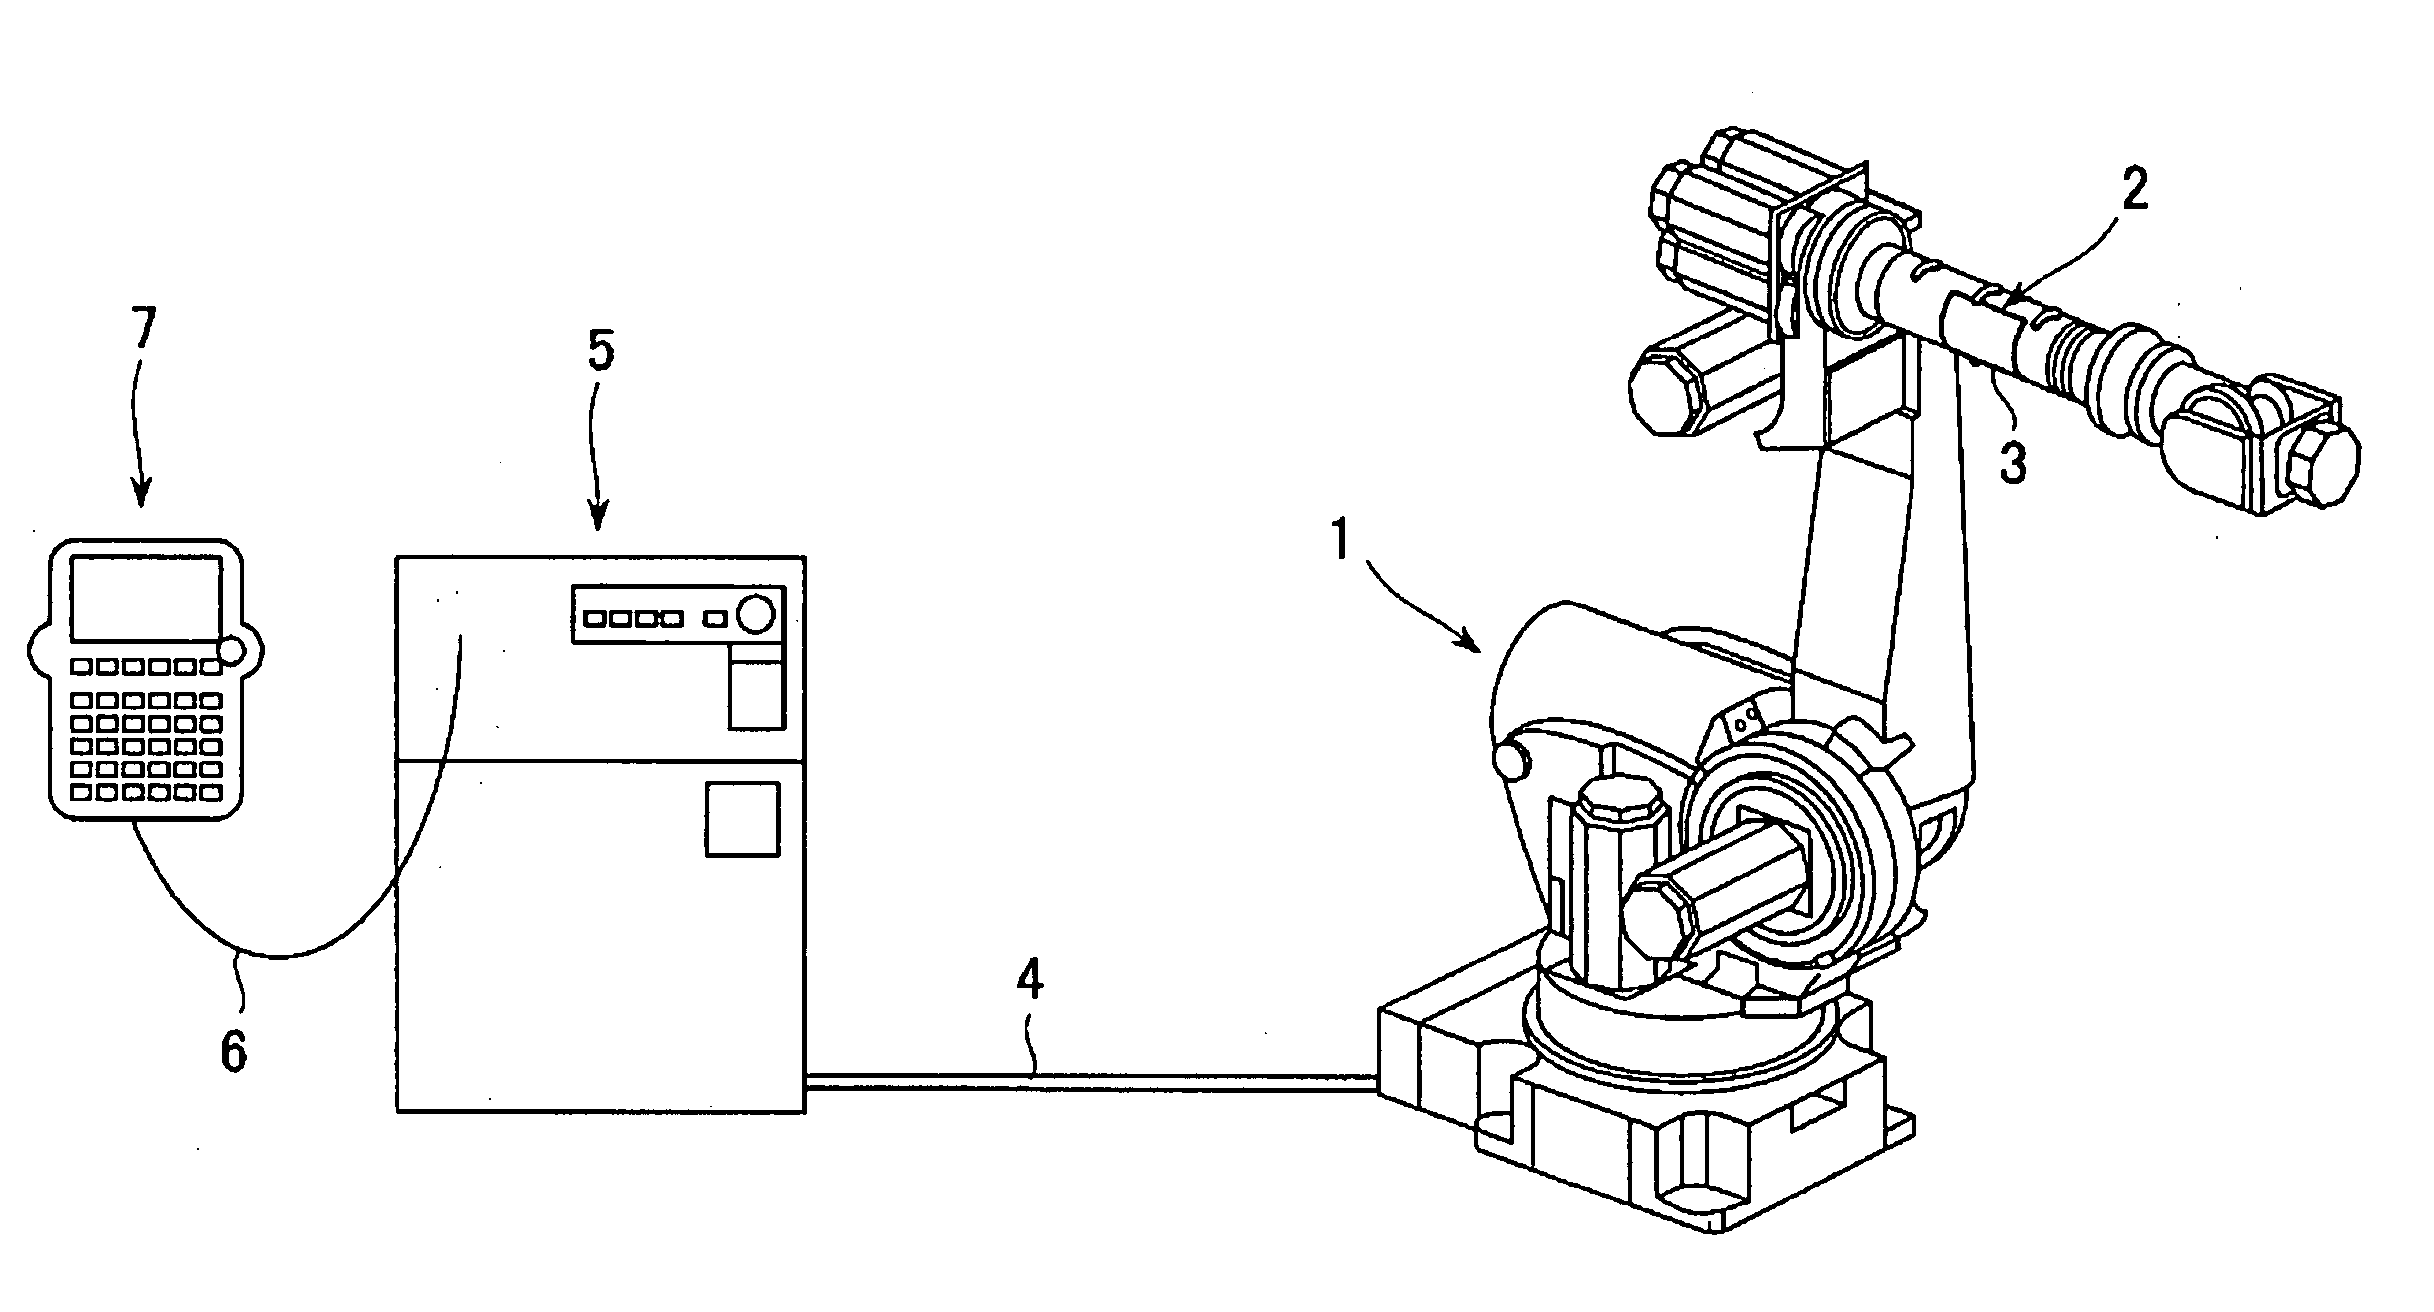 Robot with display device